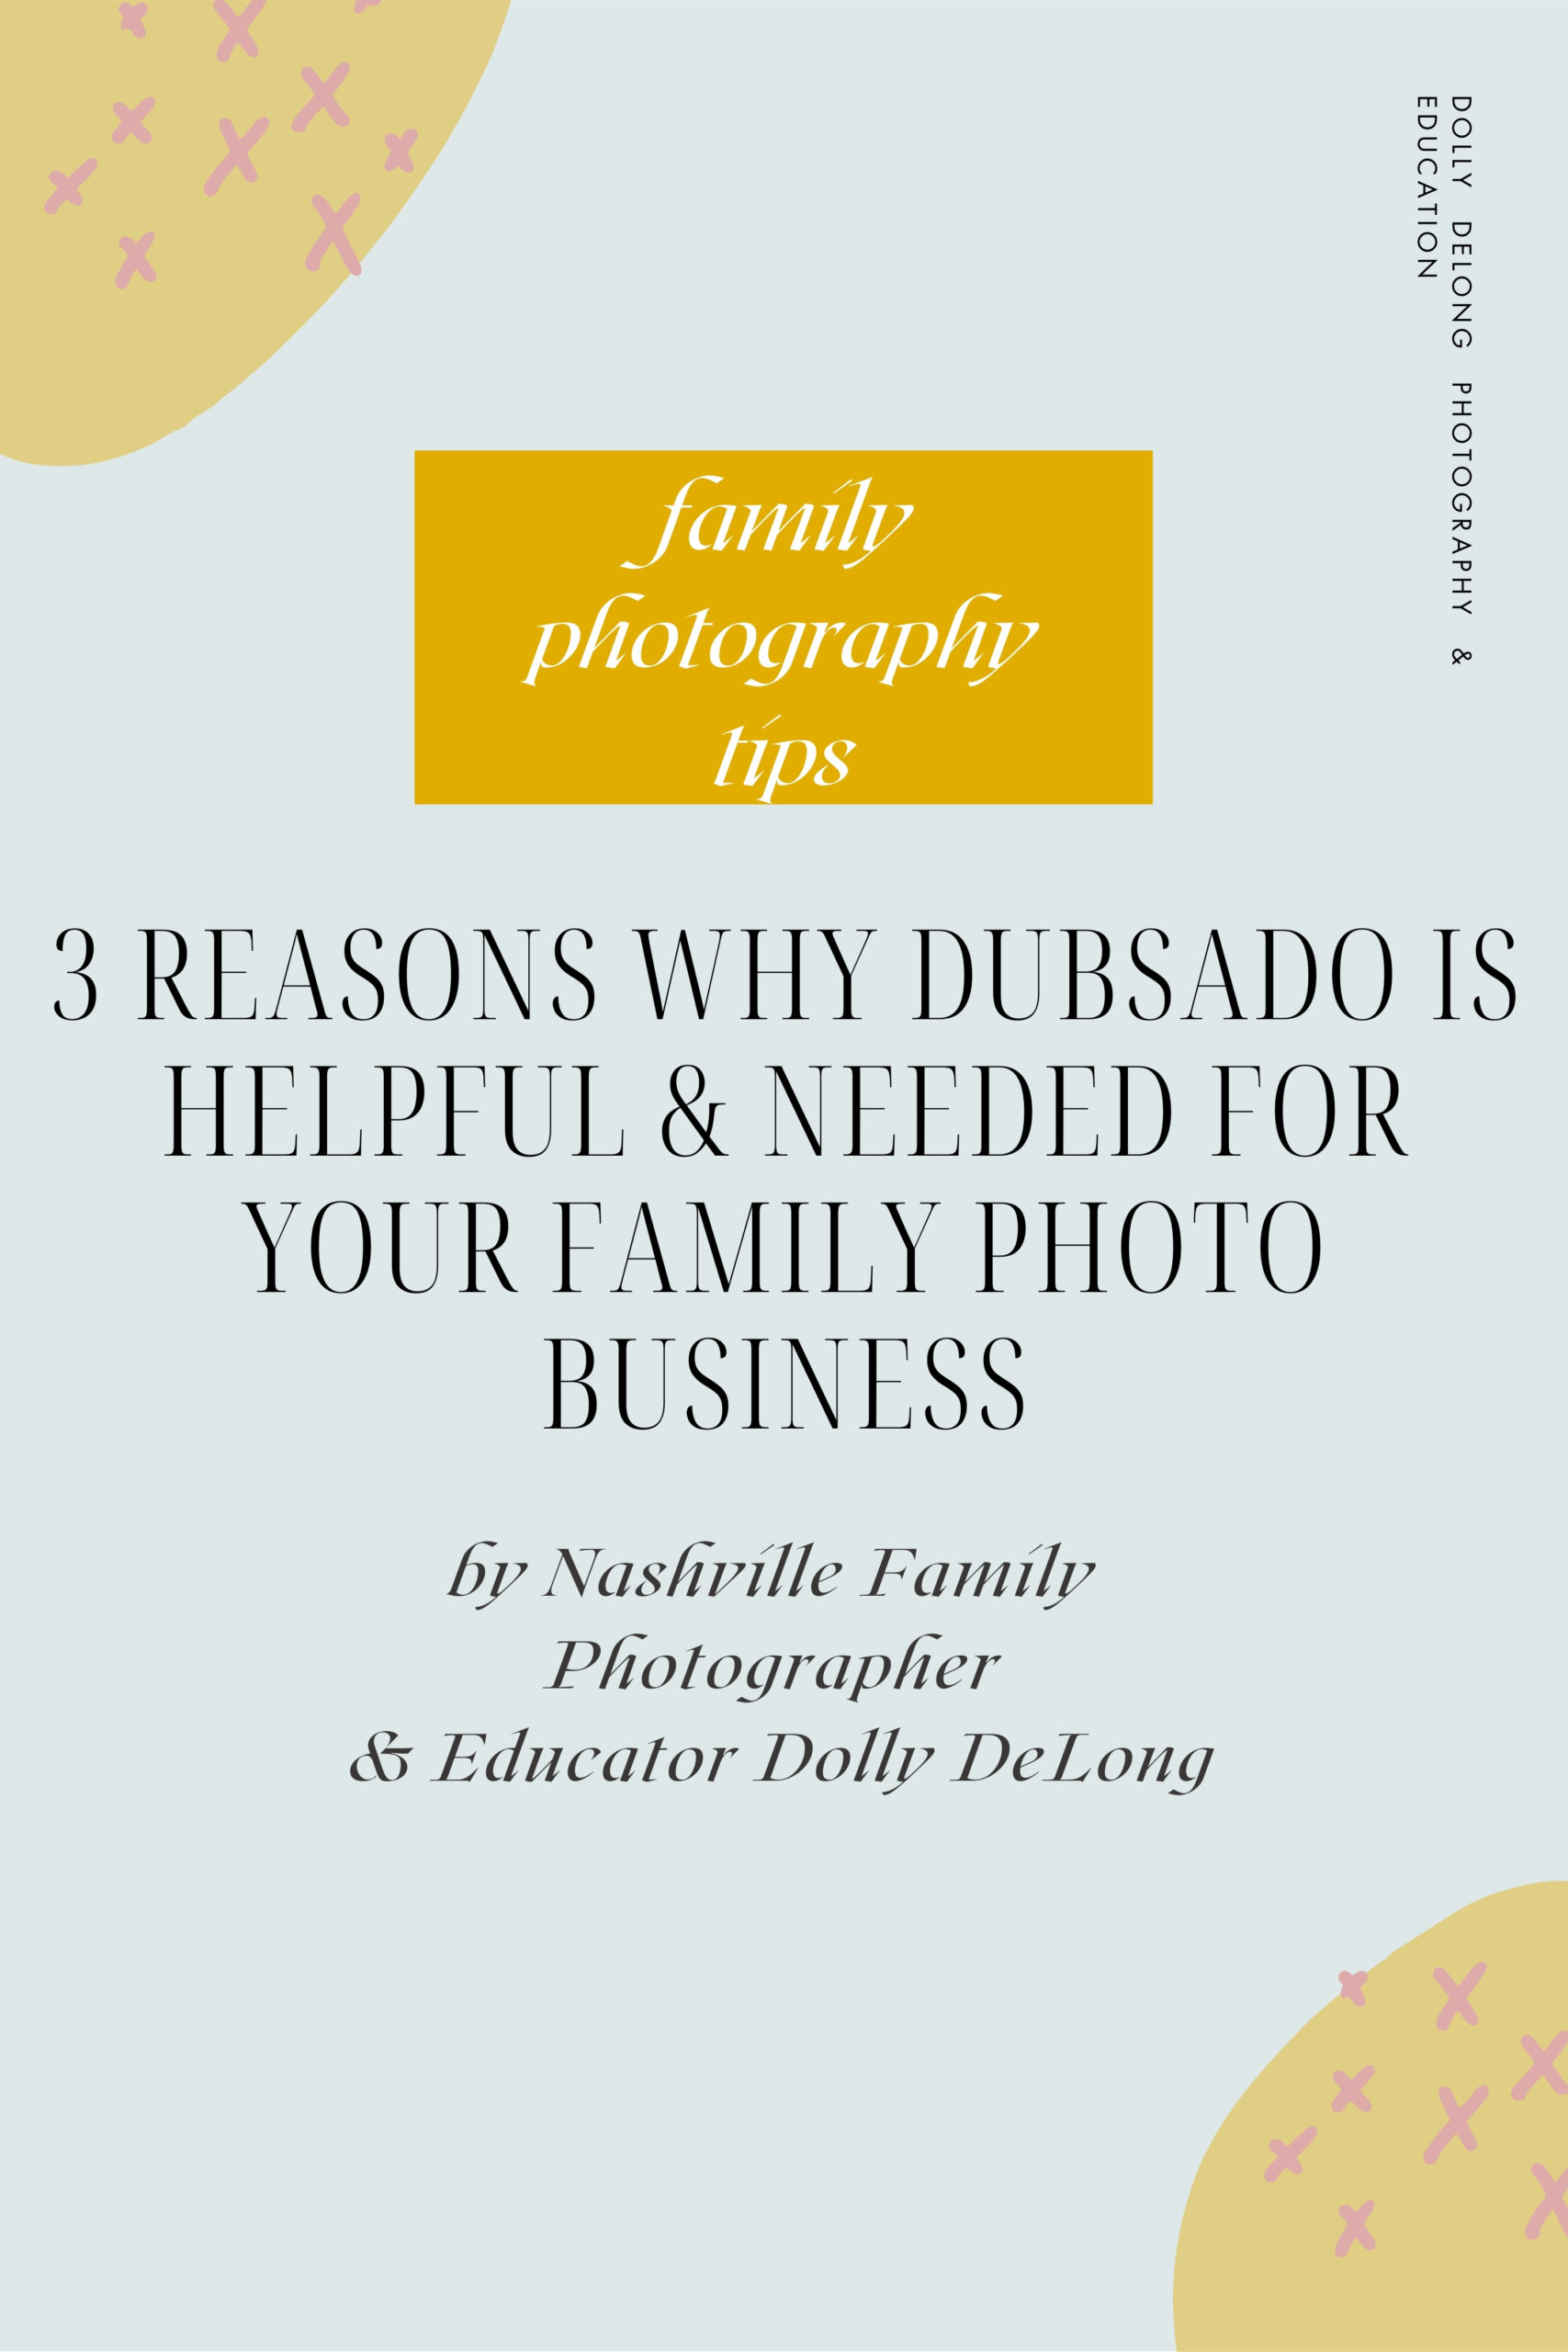 3-reasons-why-dubsado-is-needed-and-helpful-for-family-photographers